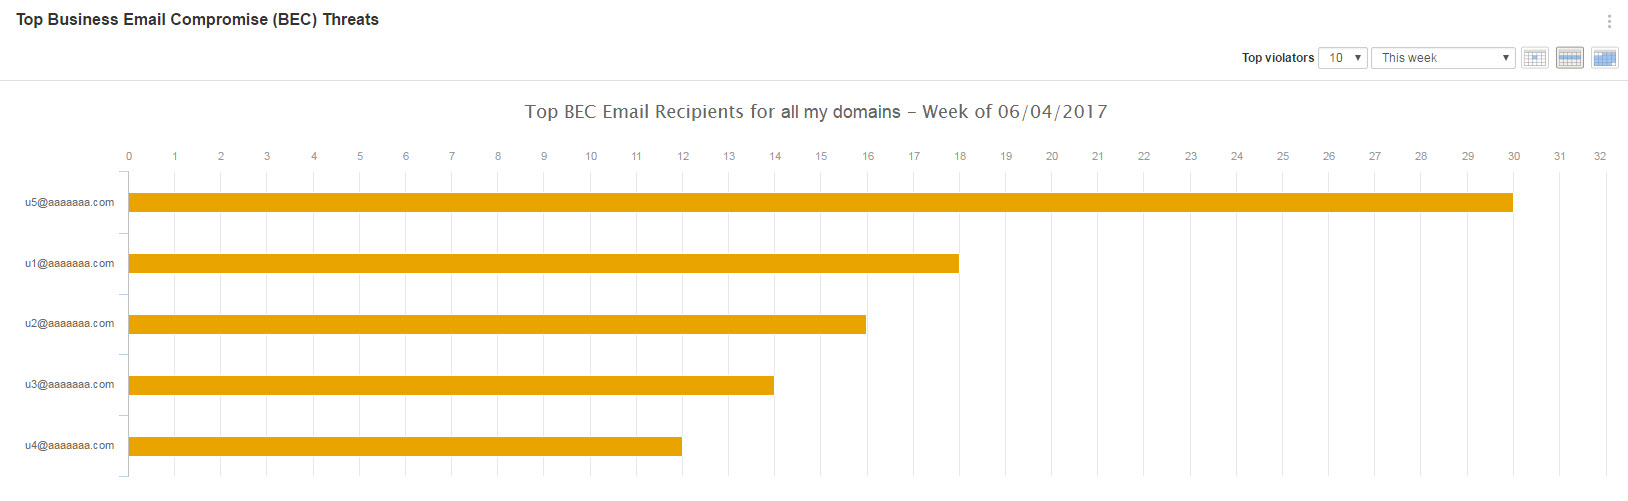 Email Chart